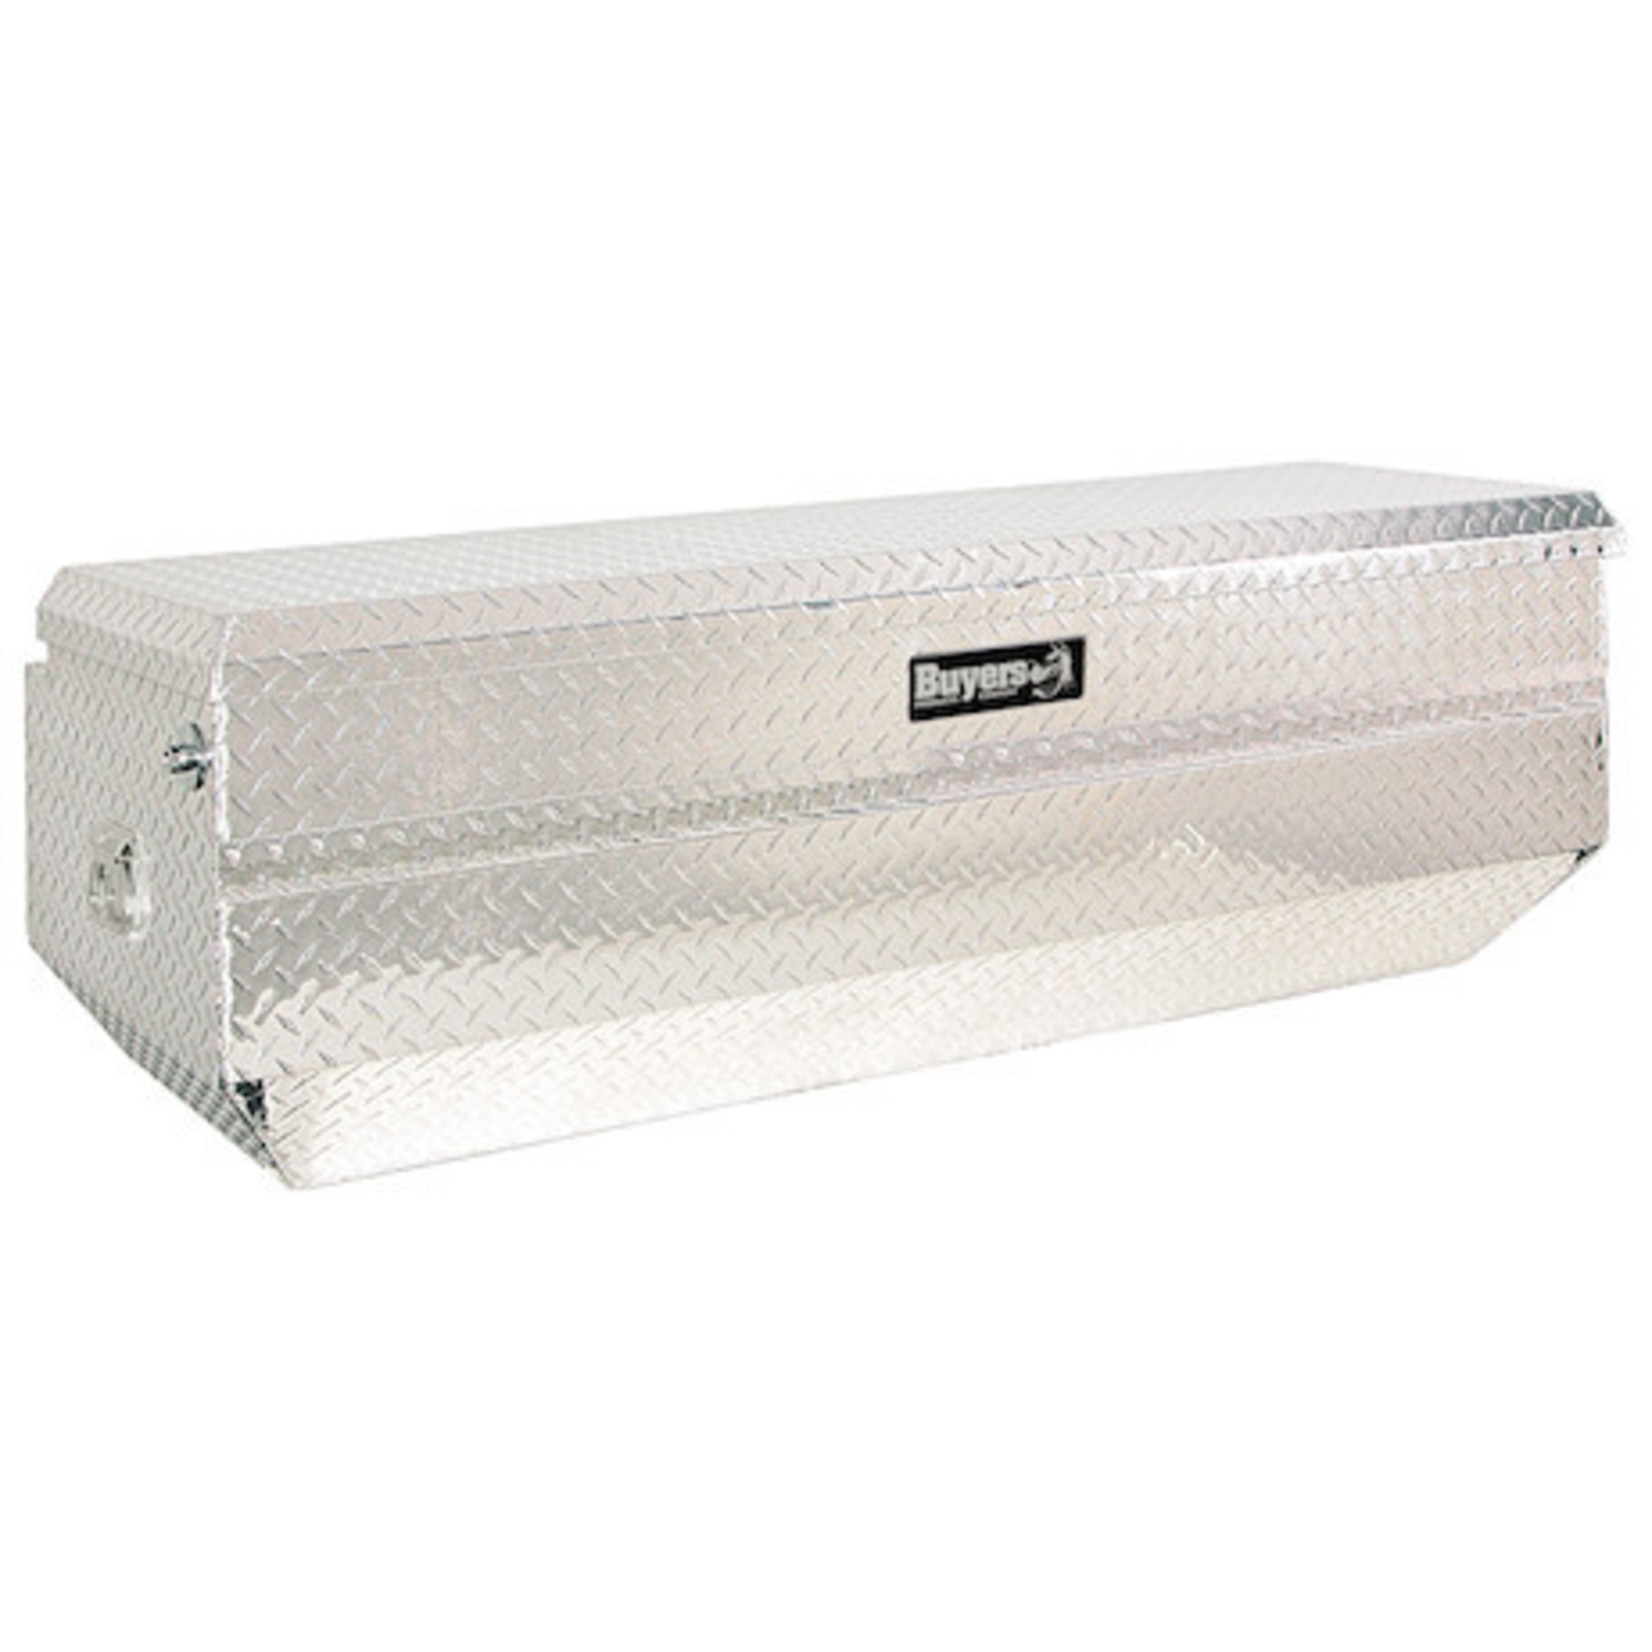 Buyers Products Company Diamond Tread Aluminum All-Purpose Chest with Angled Base Series